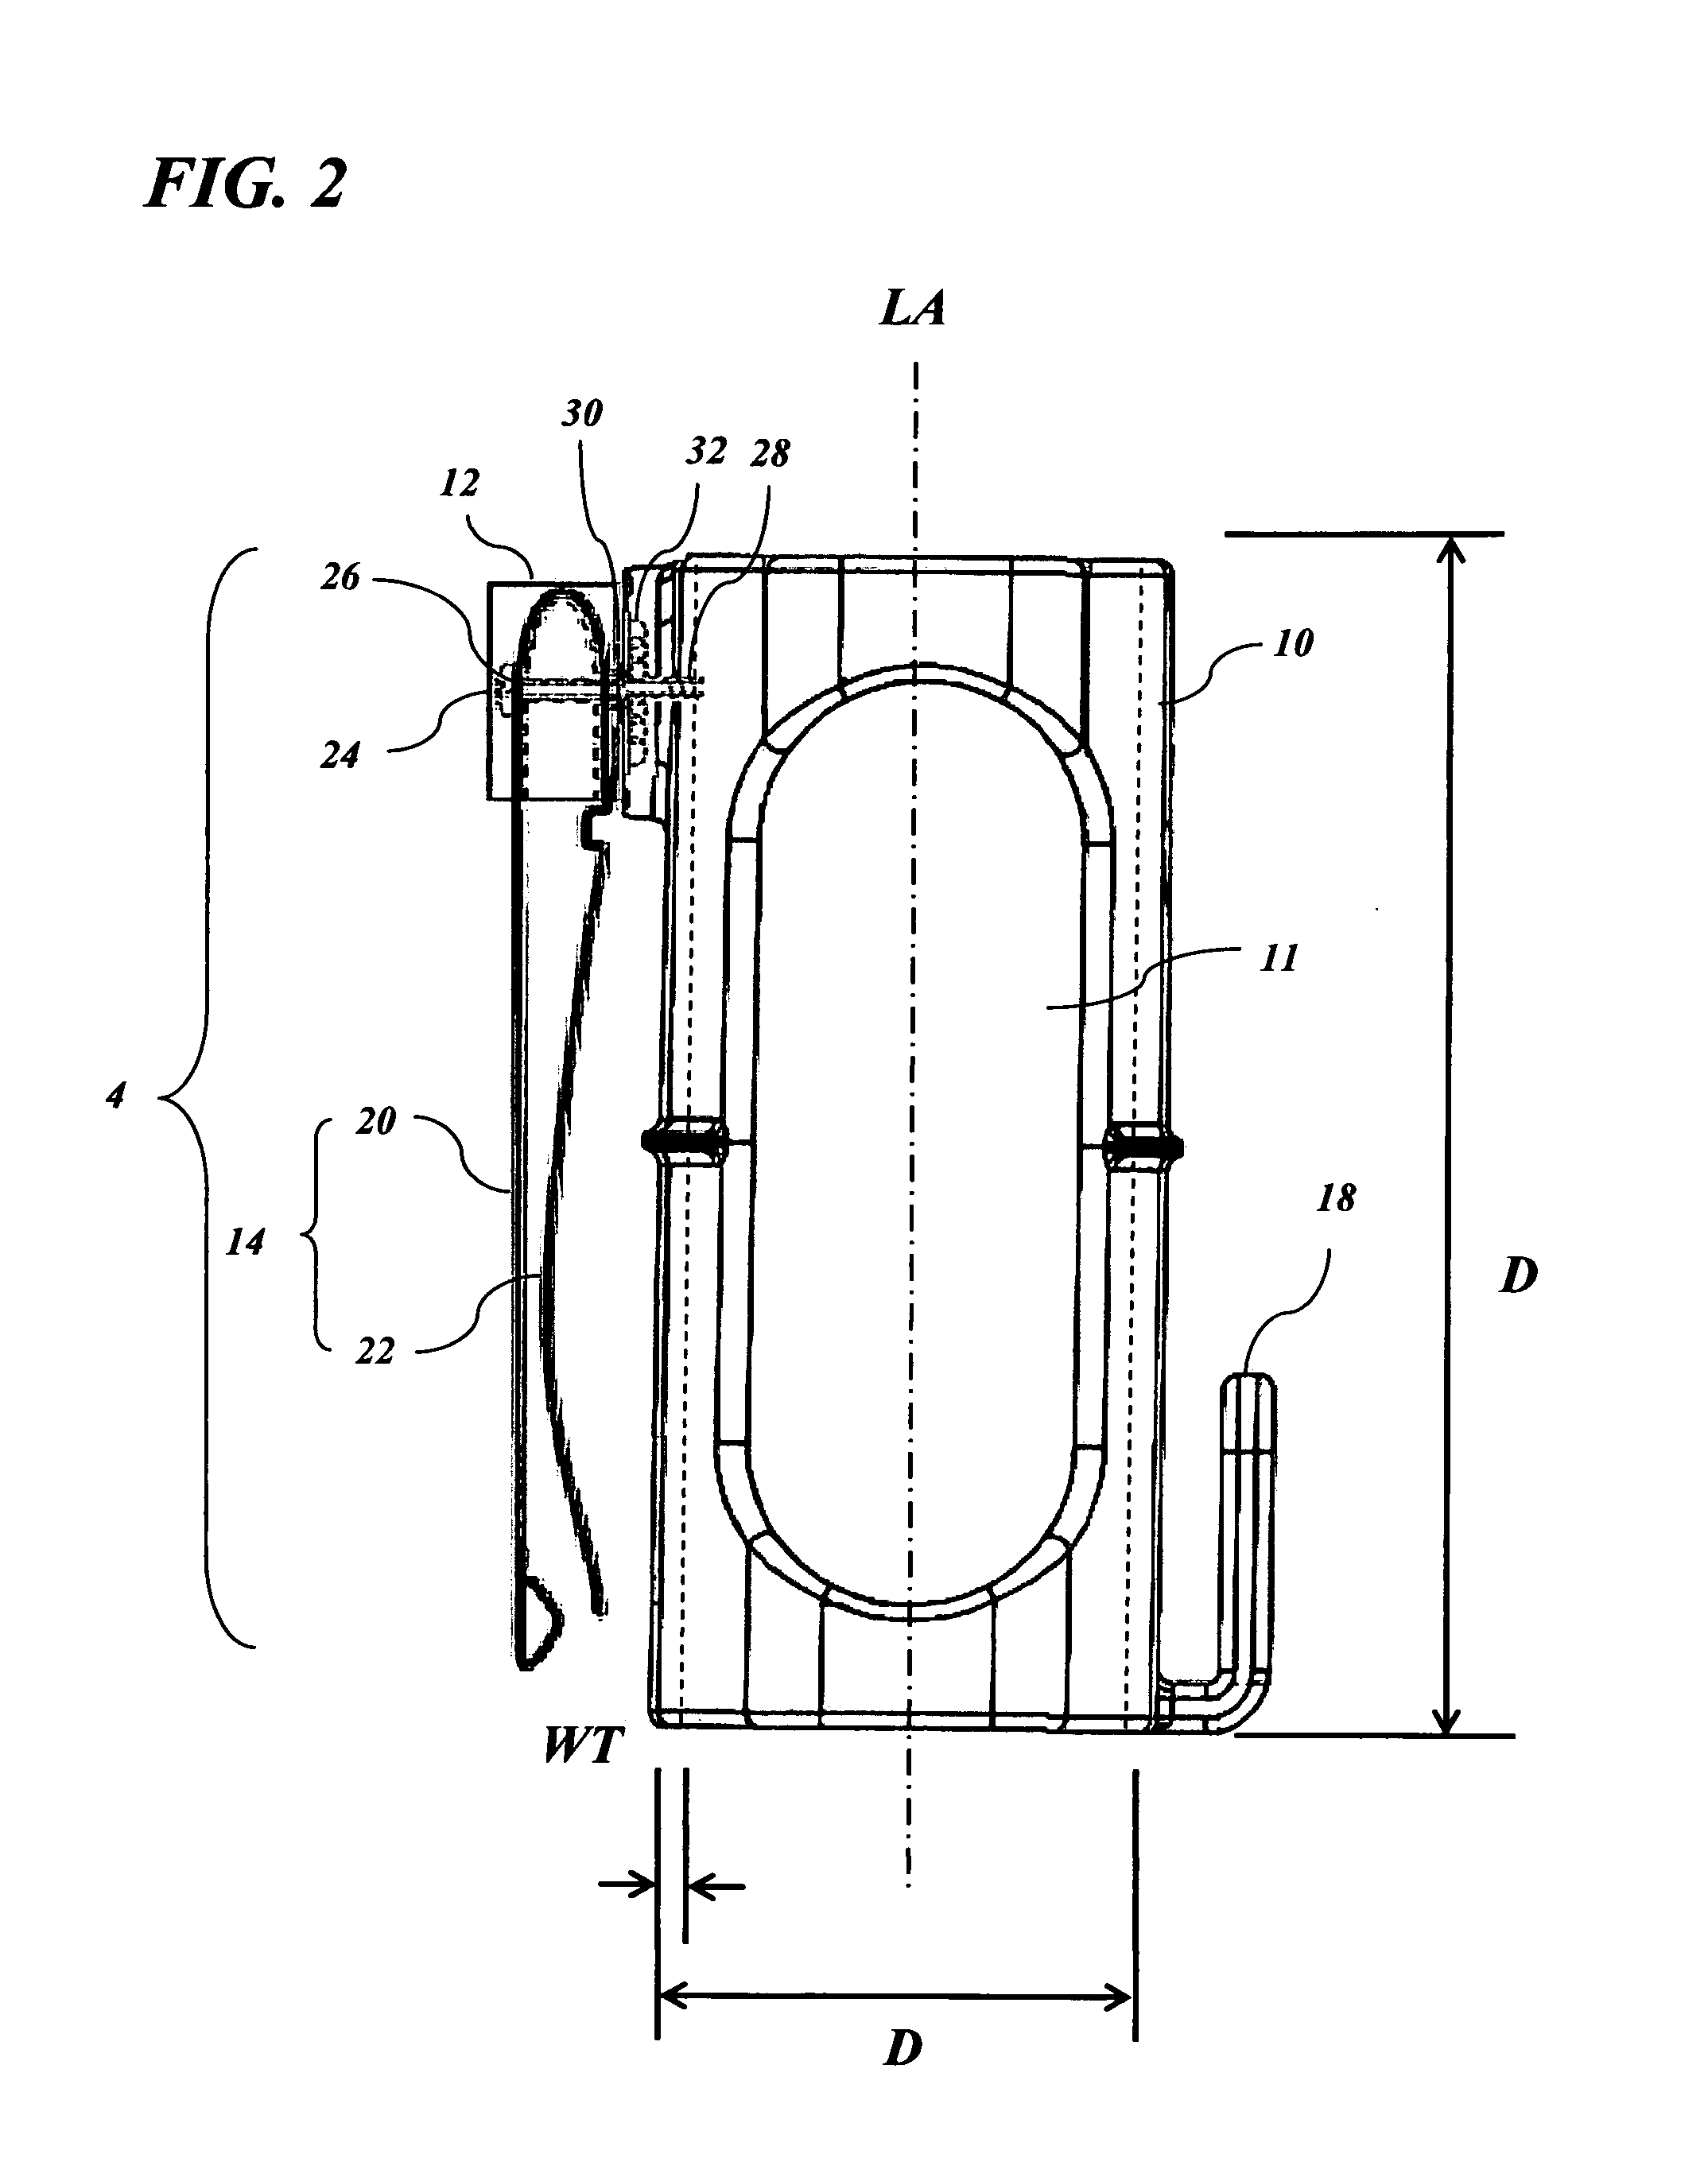 Earpiece holder with access portal and pivoting clip element